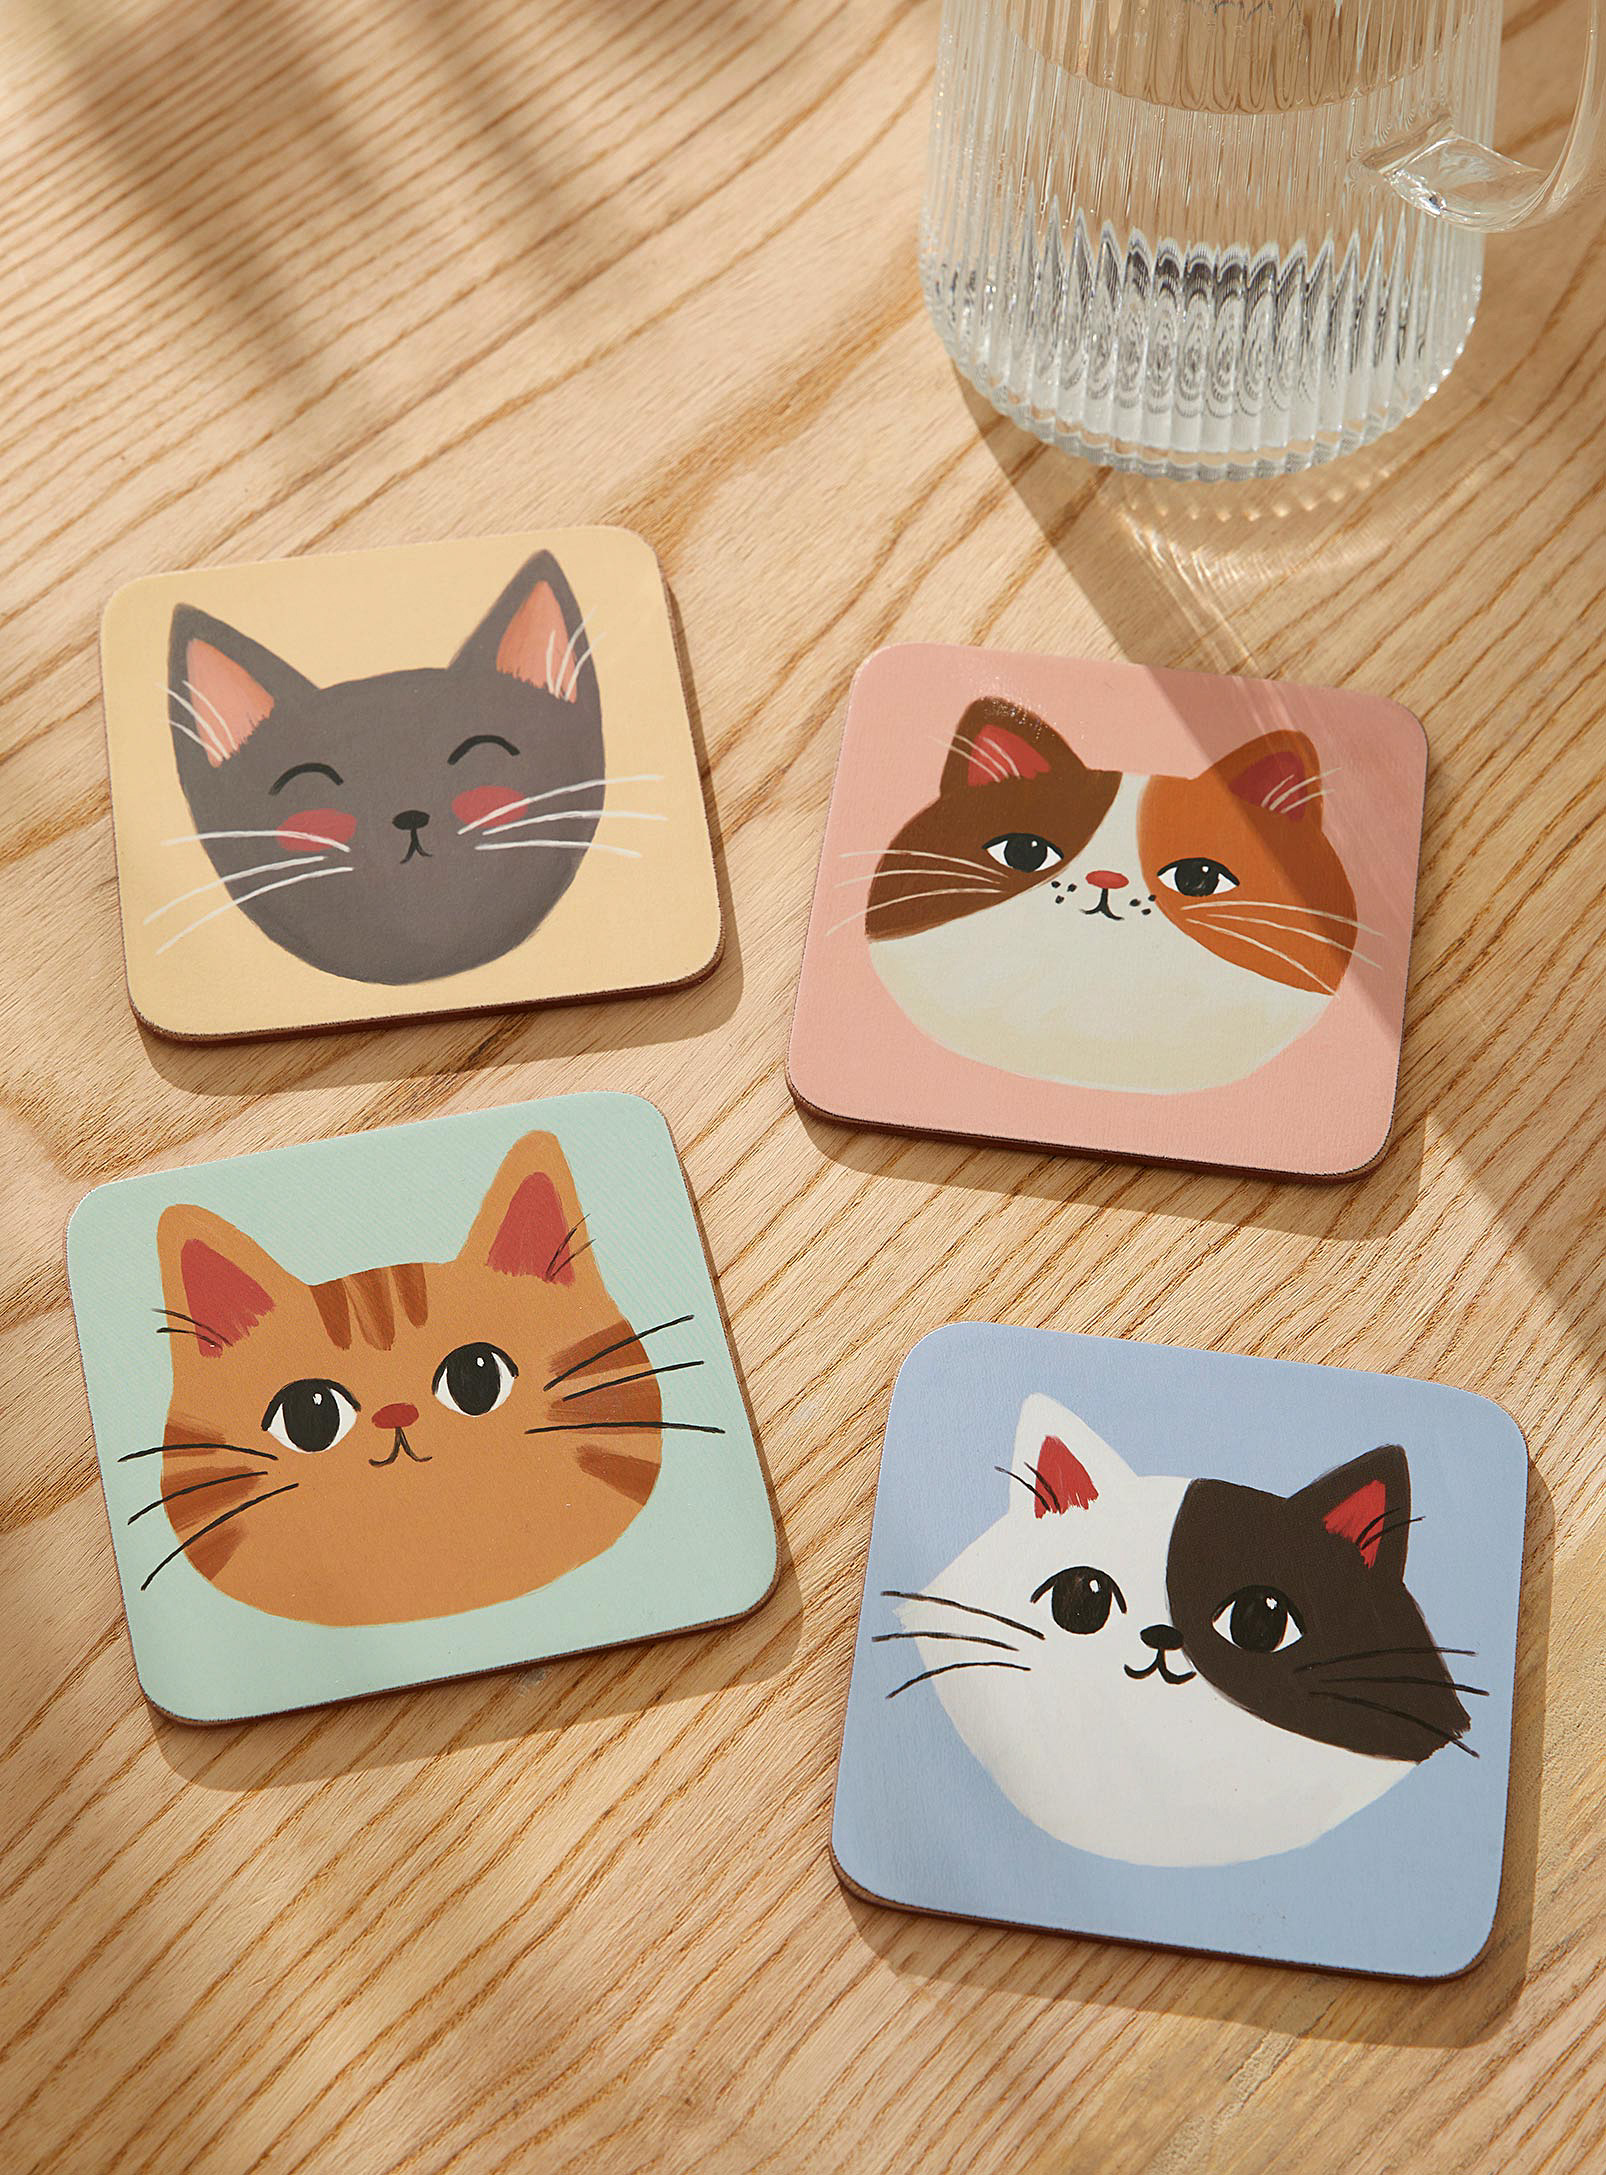 Simons Maison Cats Laminated Cork Coasters Set Of 4 In Assorted